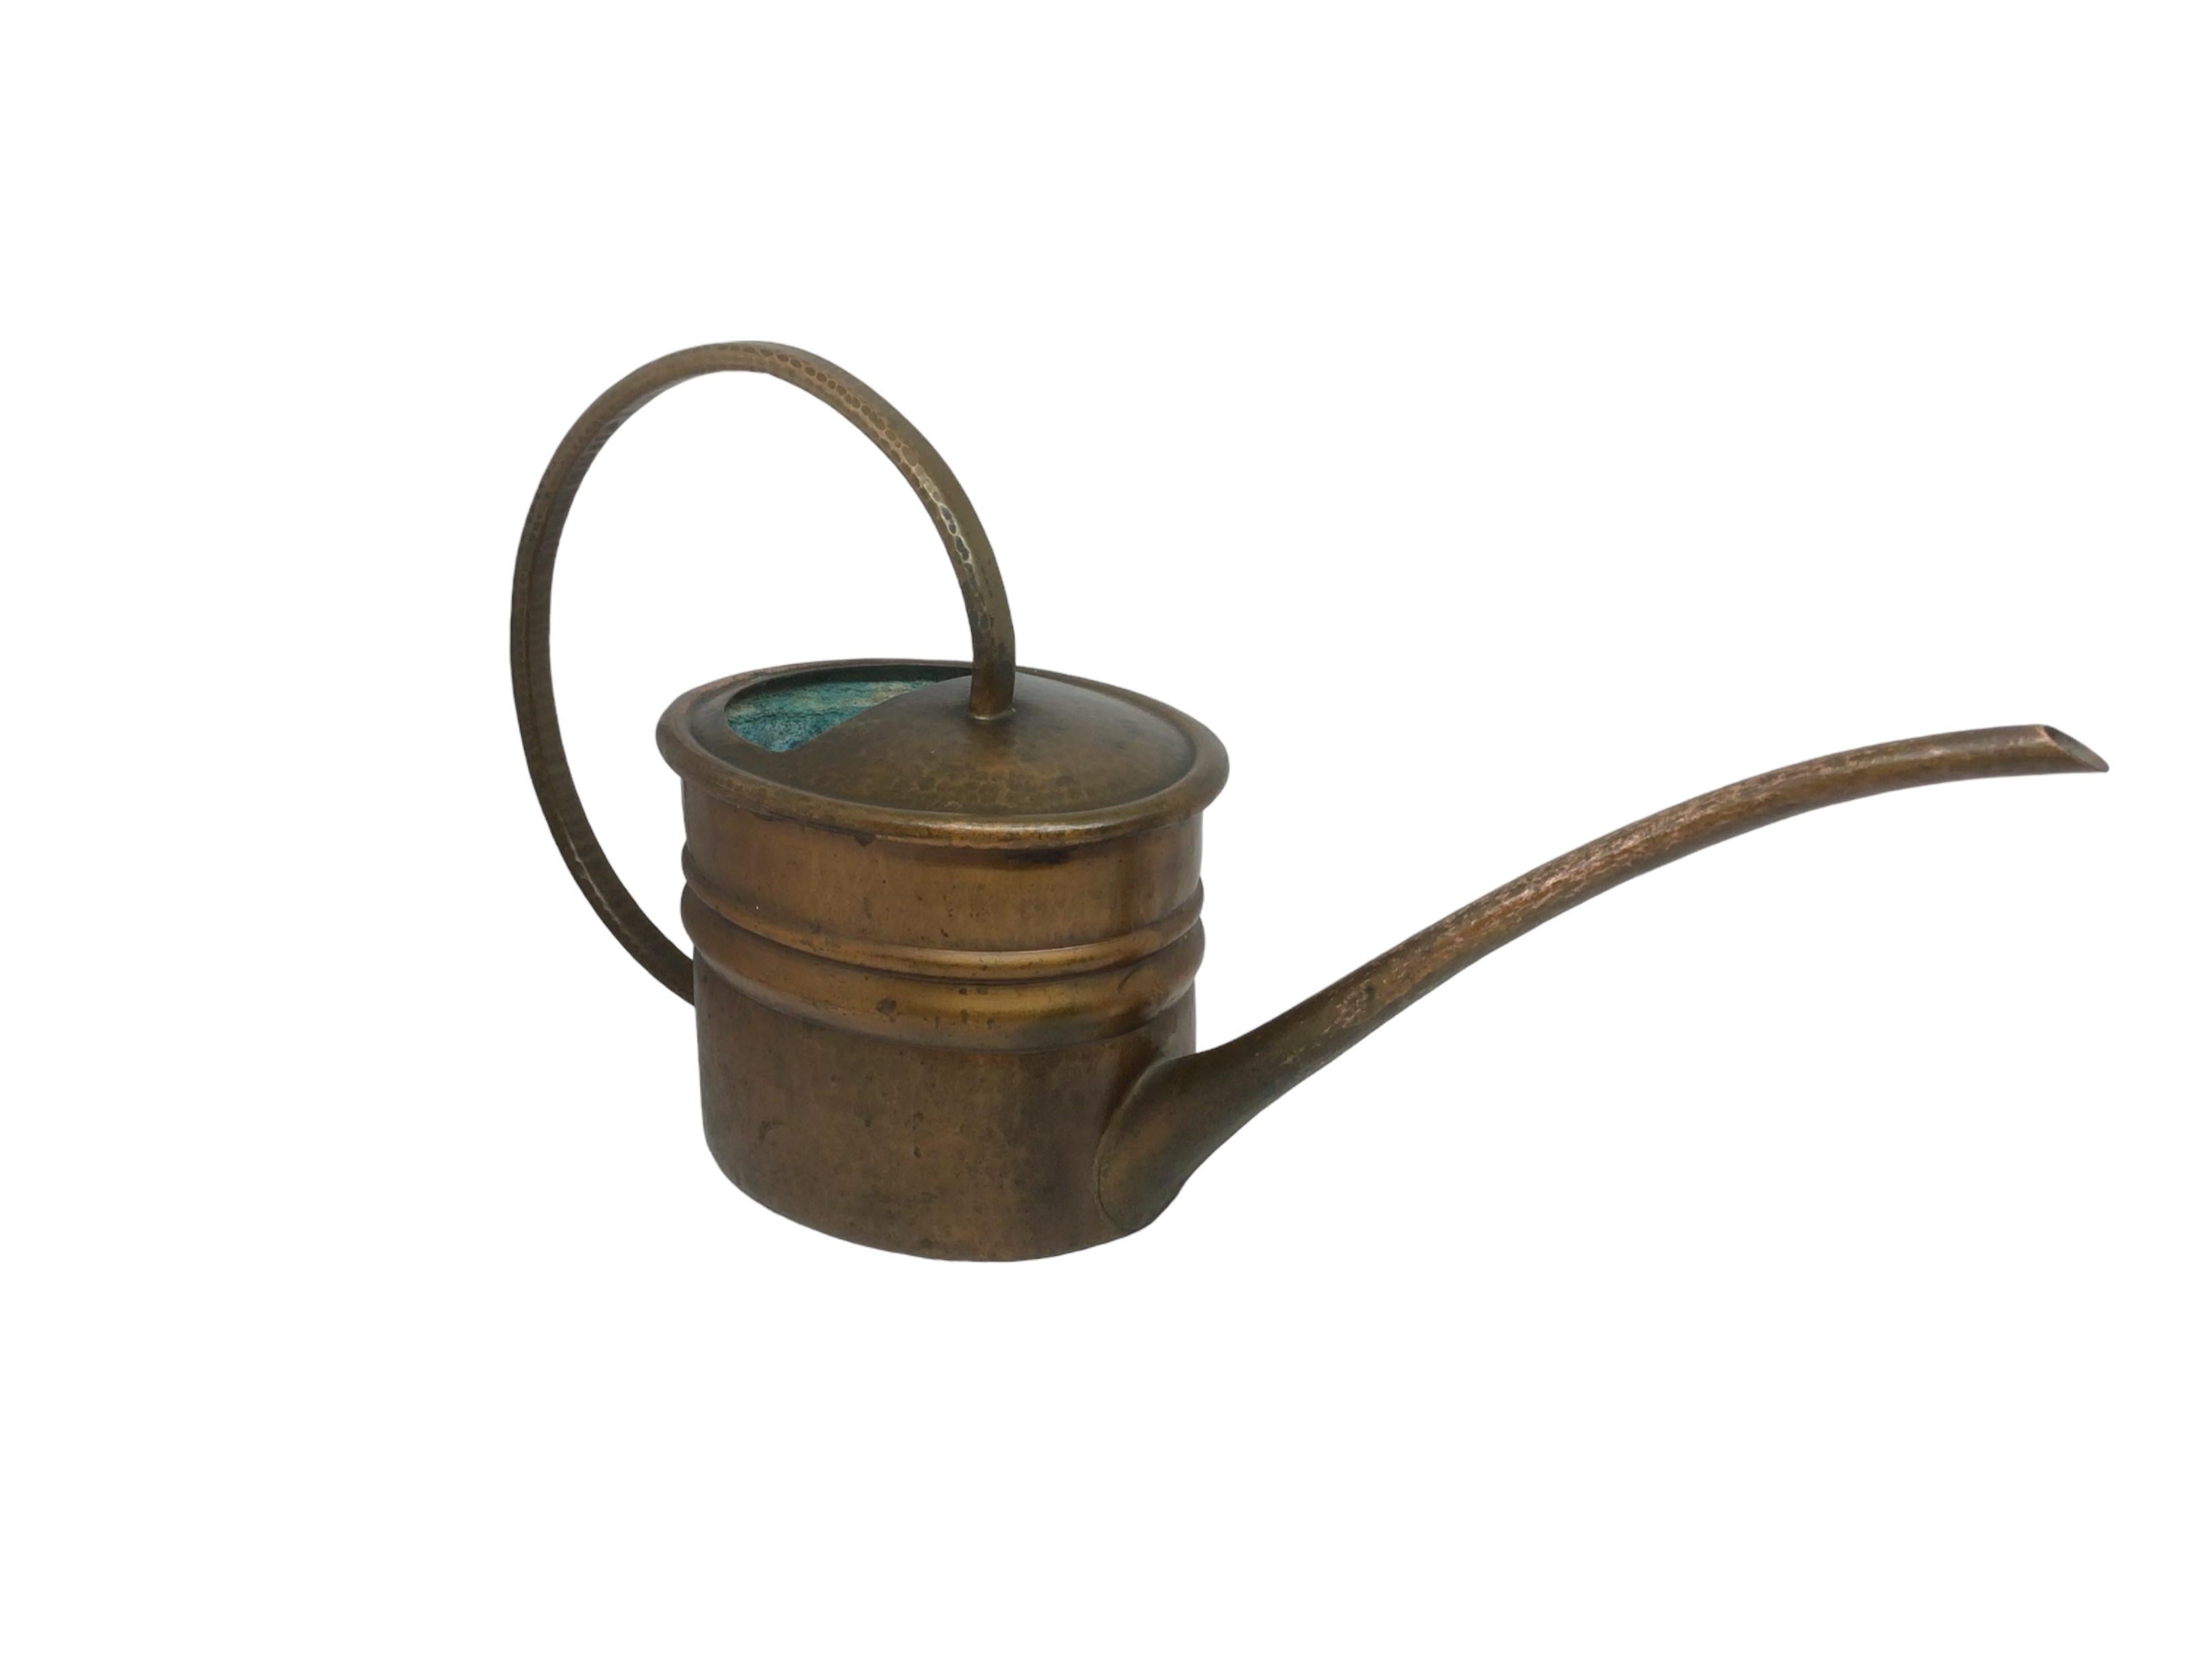 Hand-Crafted Vintage Mid-Century Modern Copper Bonsai Watering Can with Long Spout, 1960s